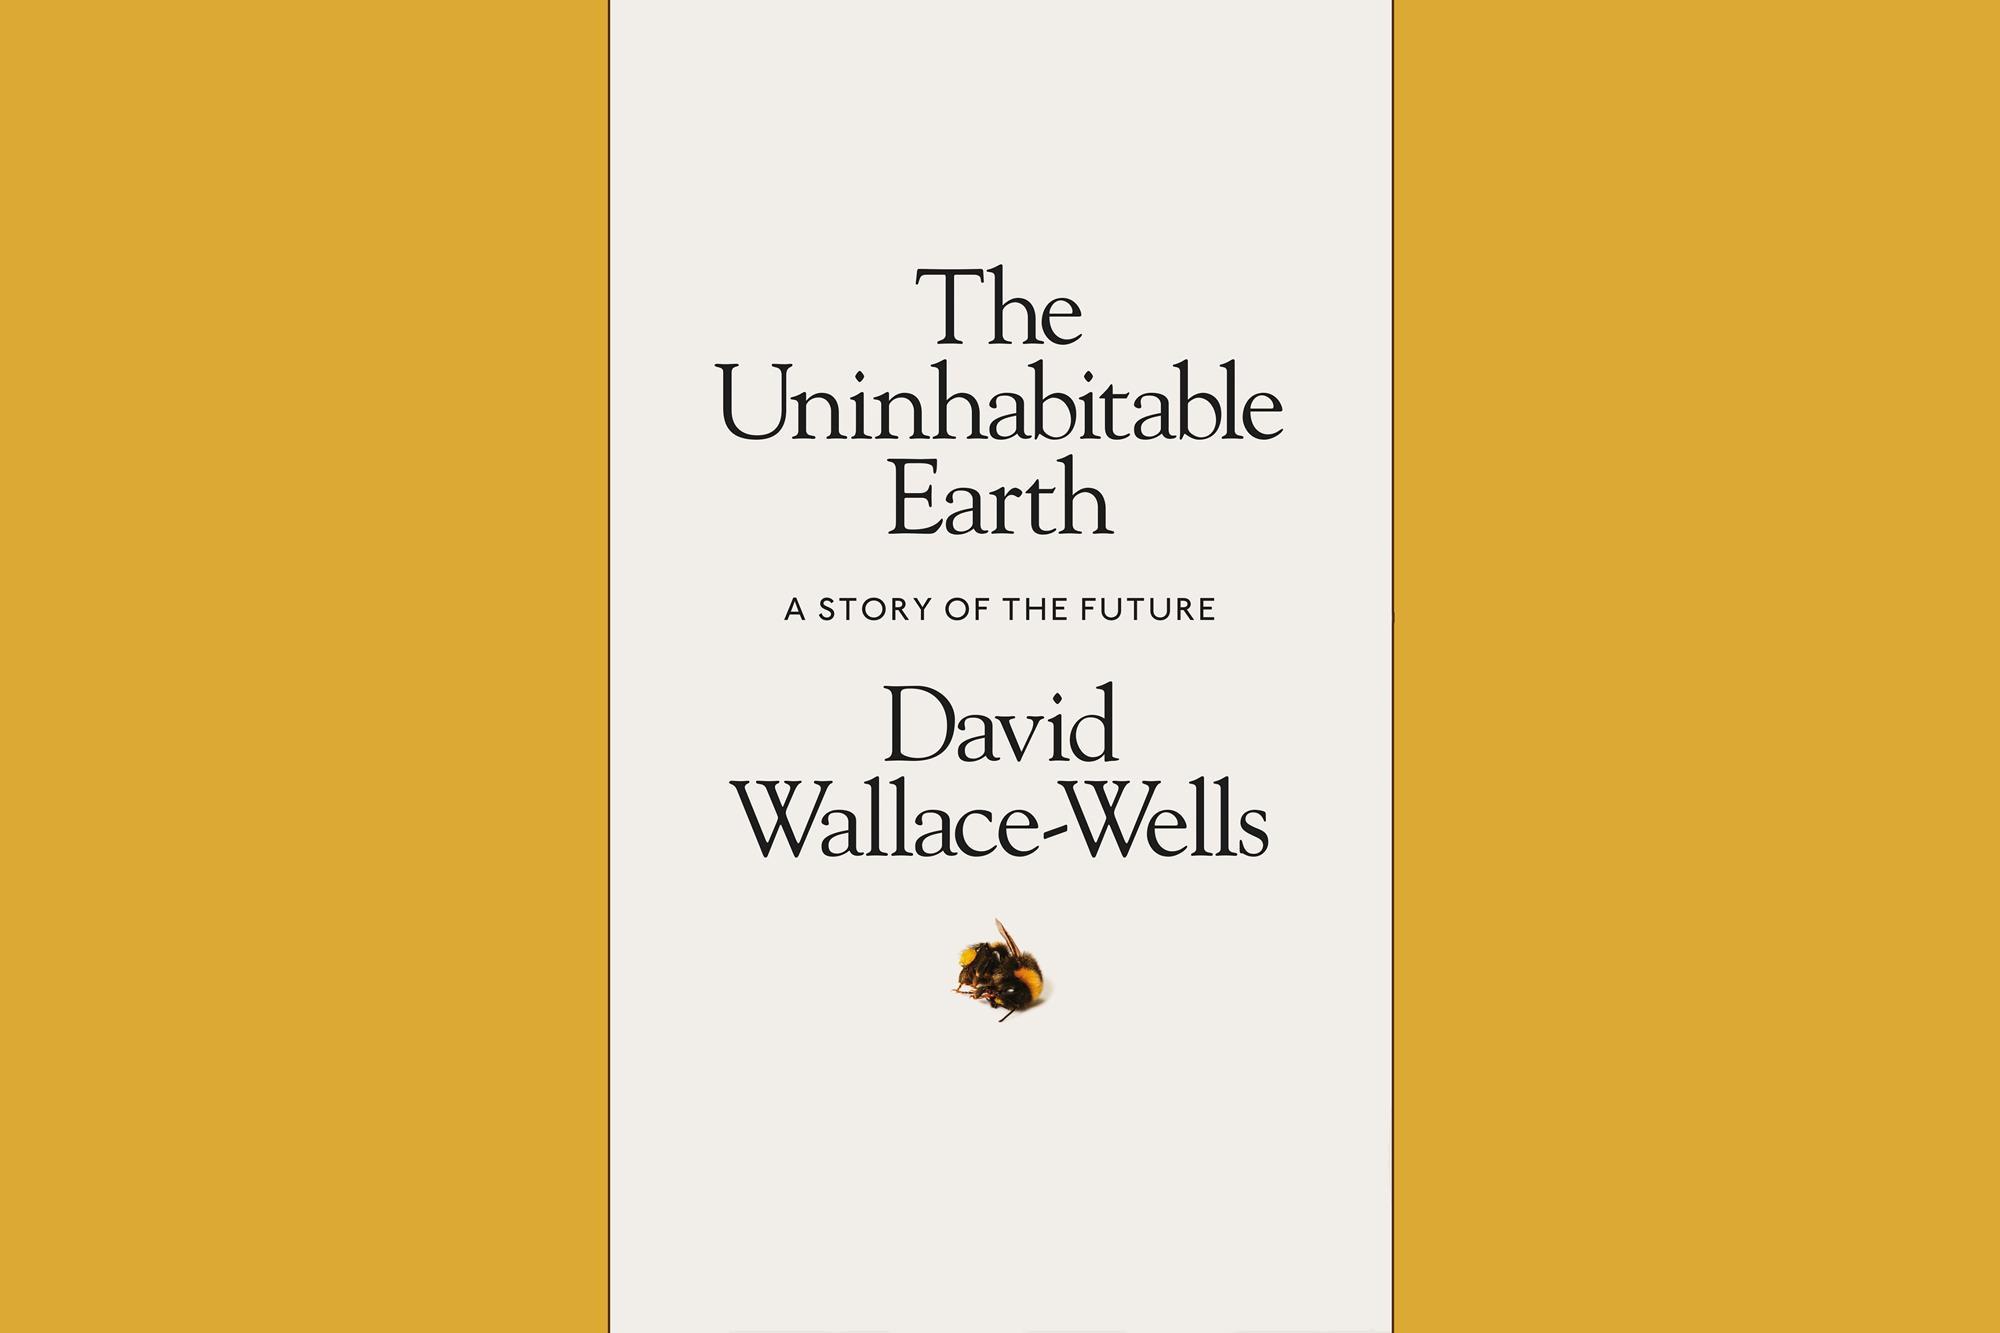 The Uninhabitable Earth: A Story of the Future | Review